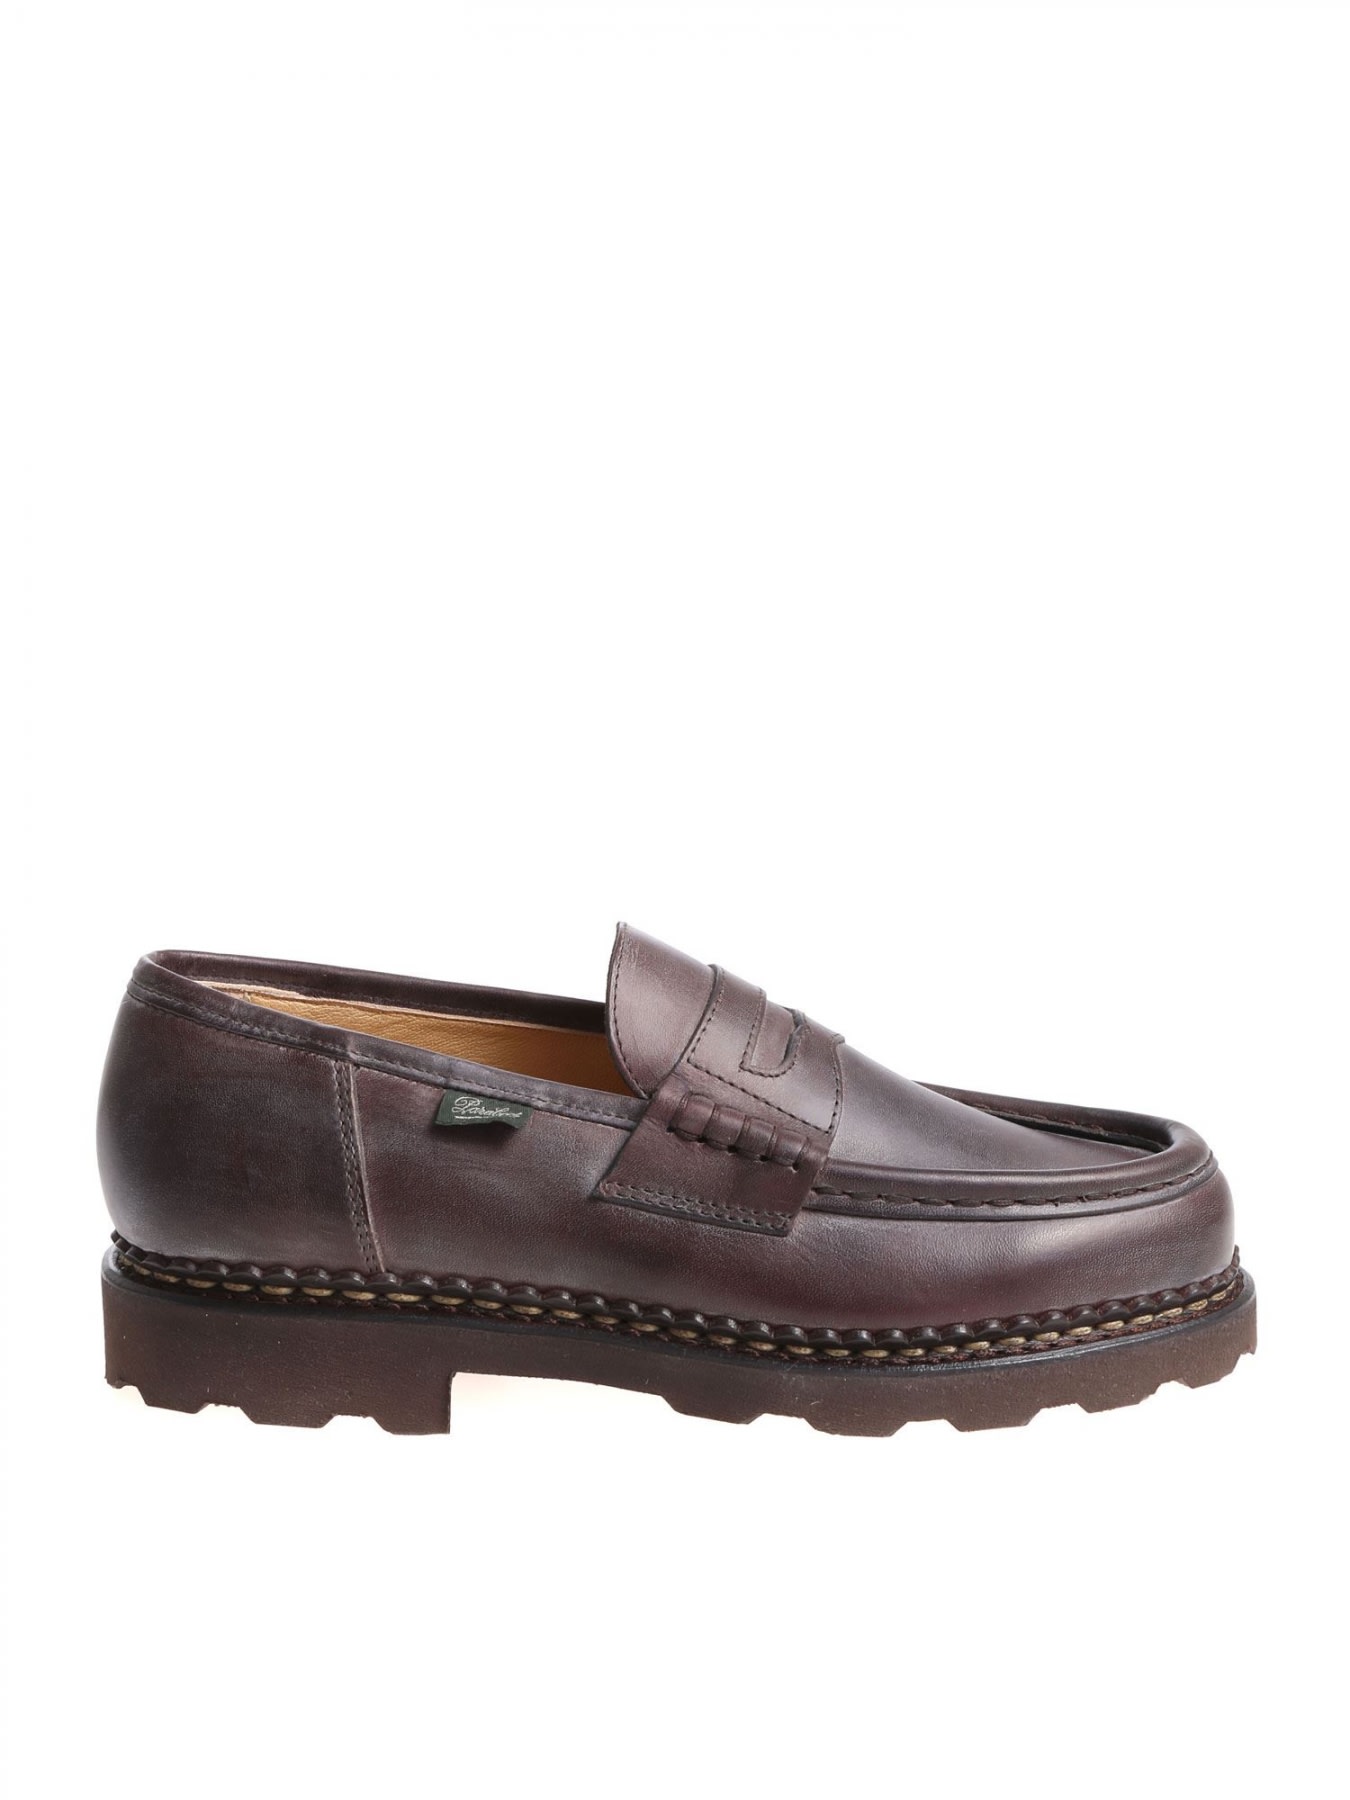 Paraboot Reims Loafer Leather